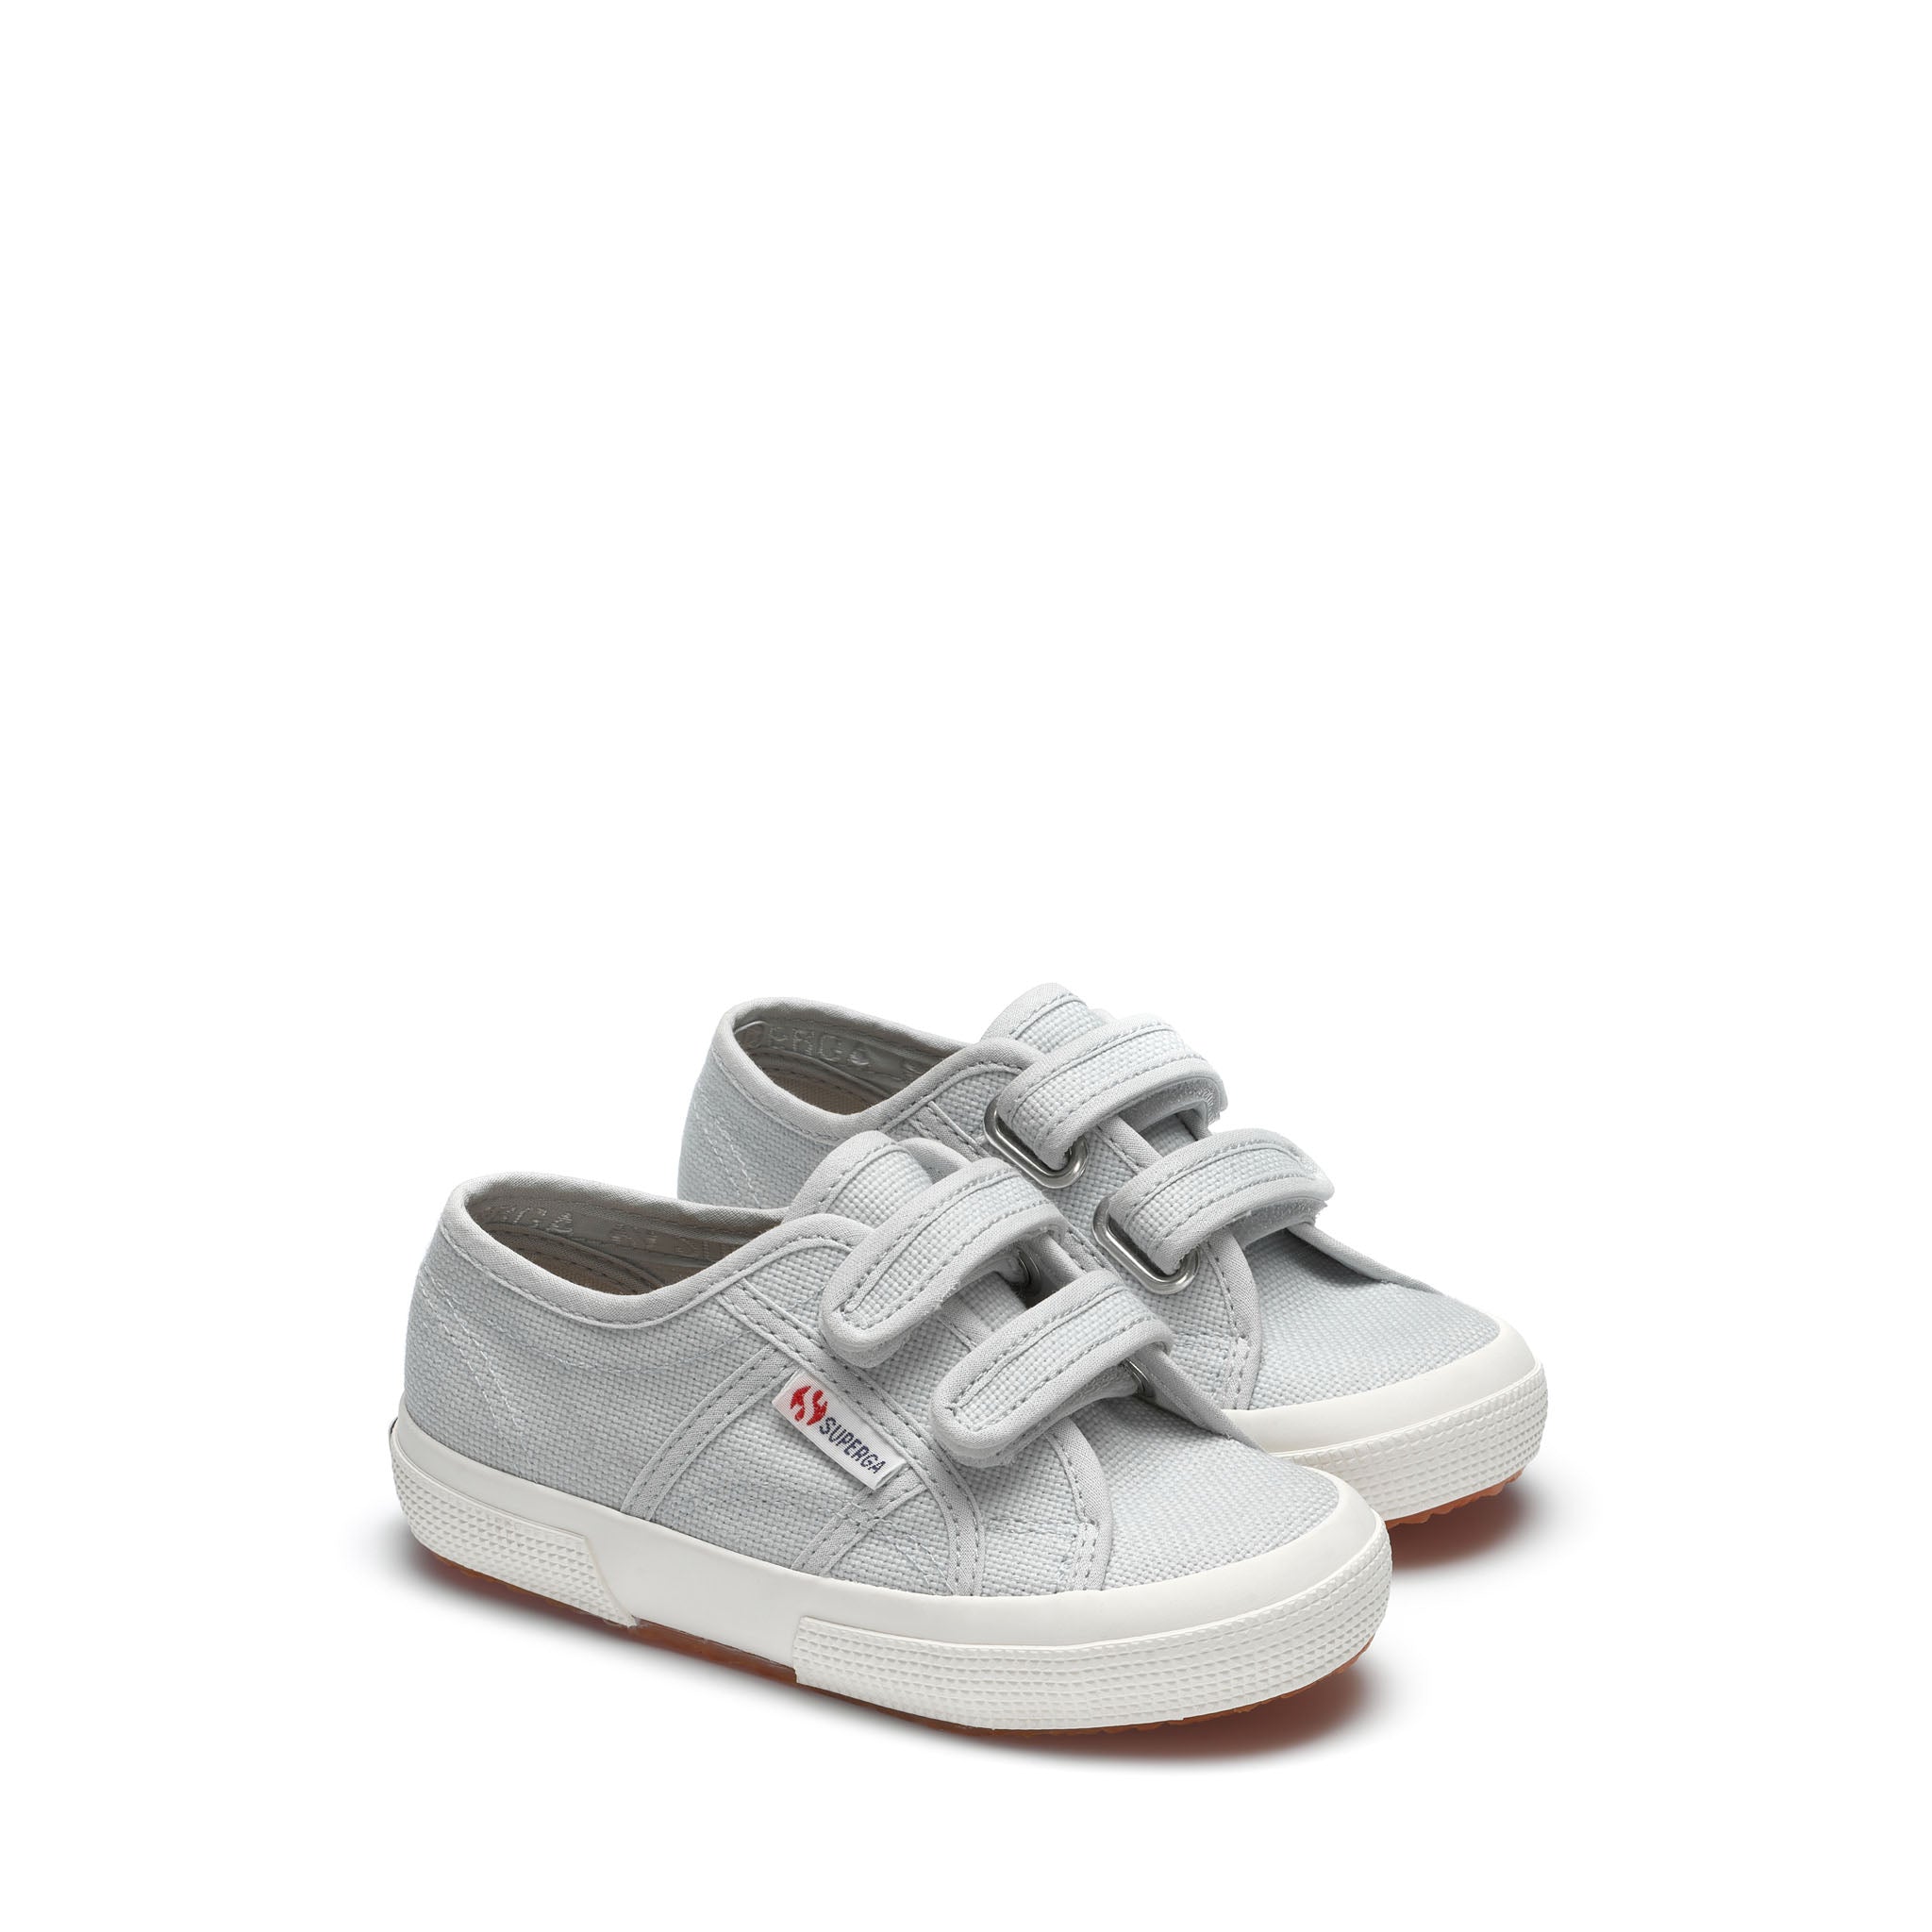 Buy SUGR by Unlimited Girls Grey Velcro Closure Mesh Sneakers - NNNOW.com